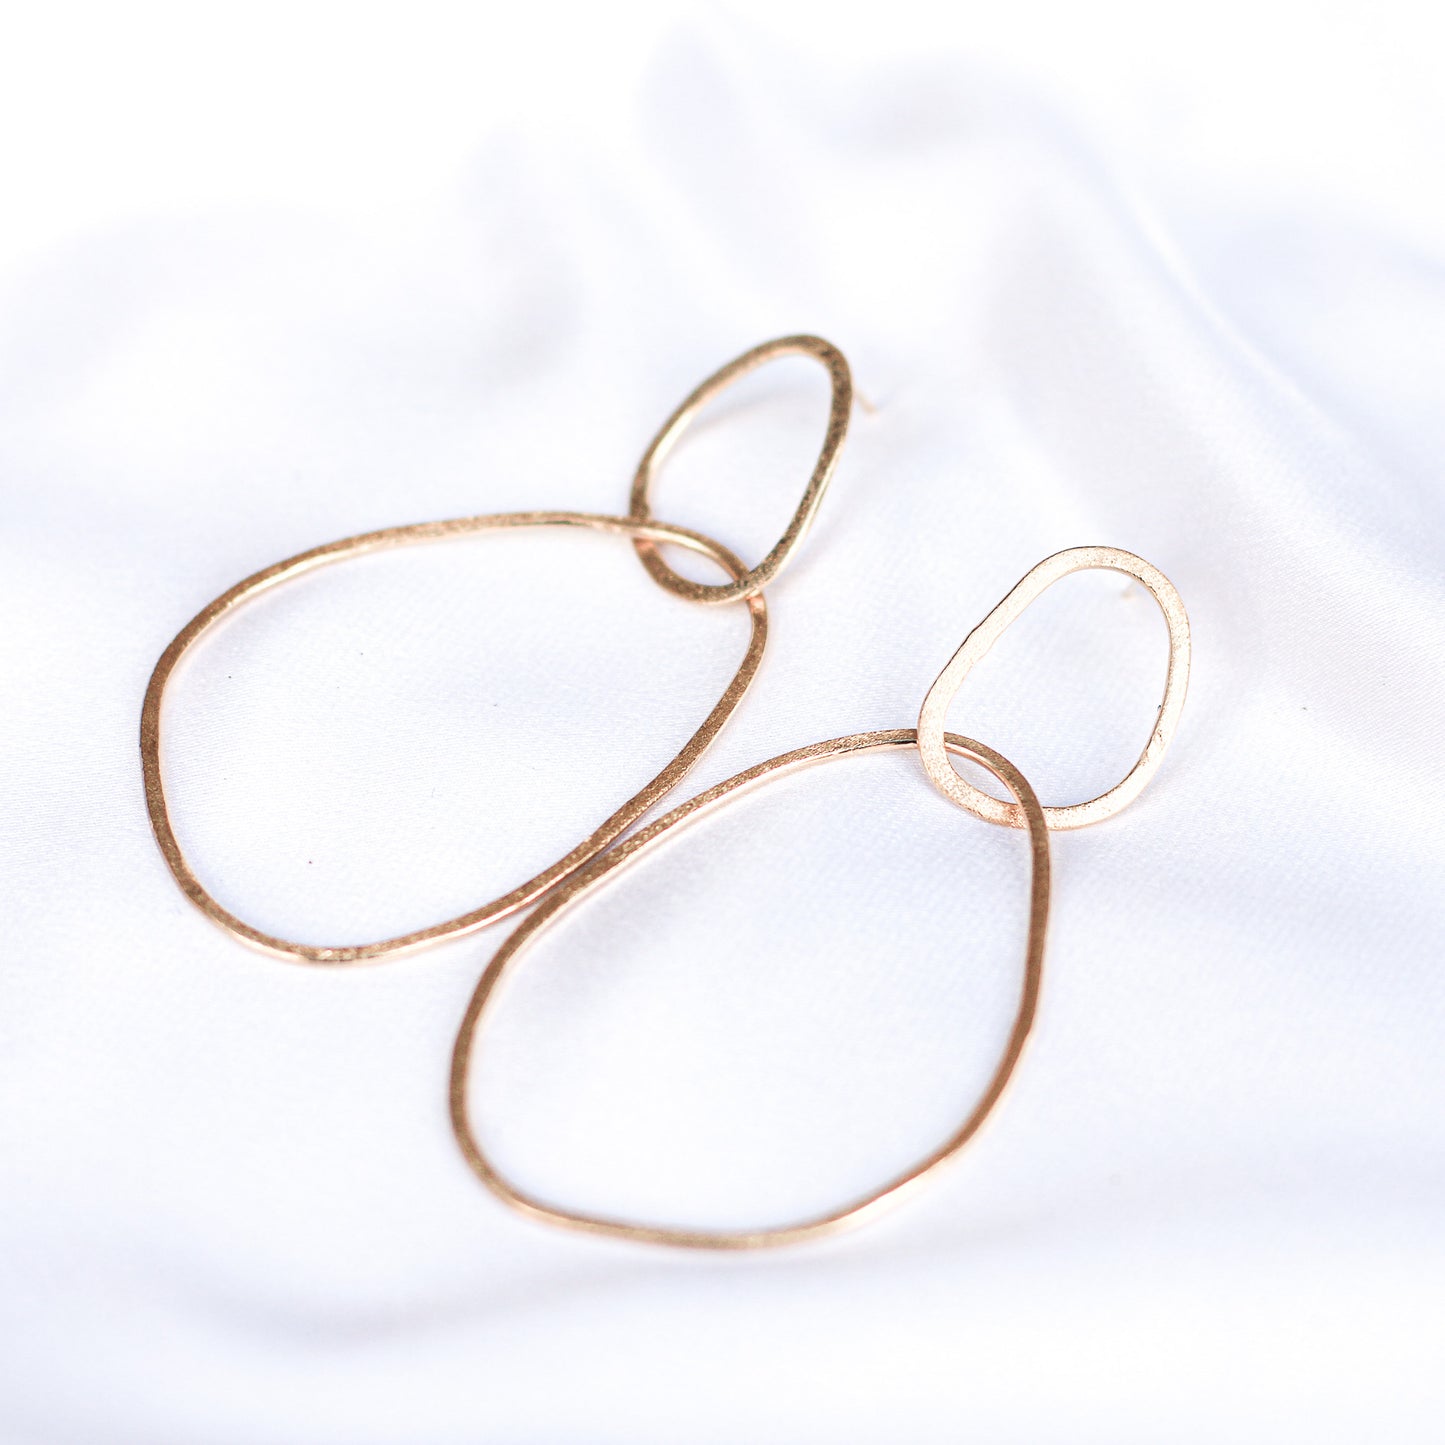 minimalist gold drop earrings with 2 organic shapes  • 14ct gold plated